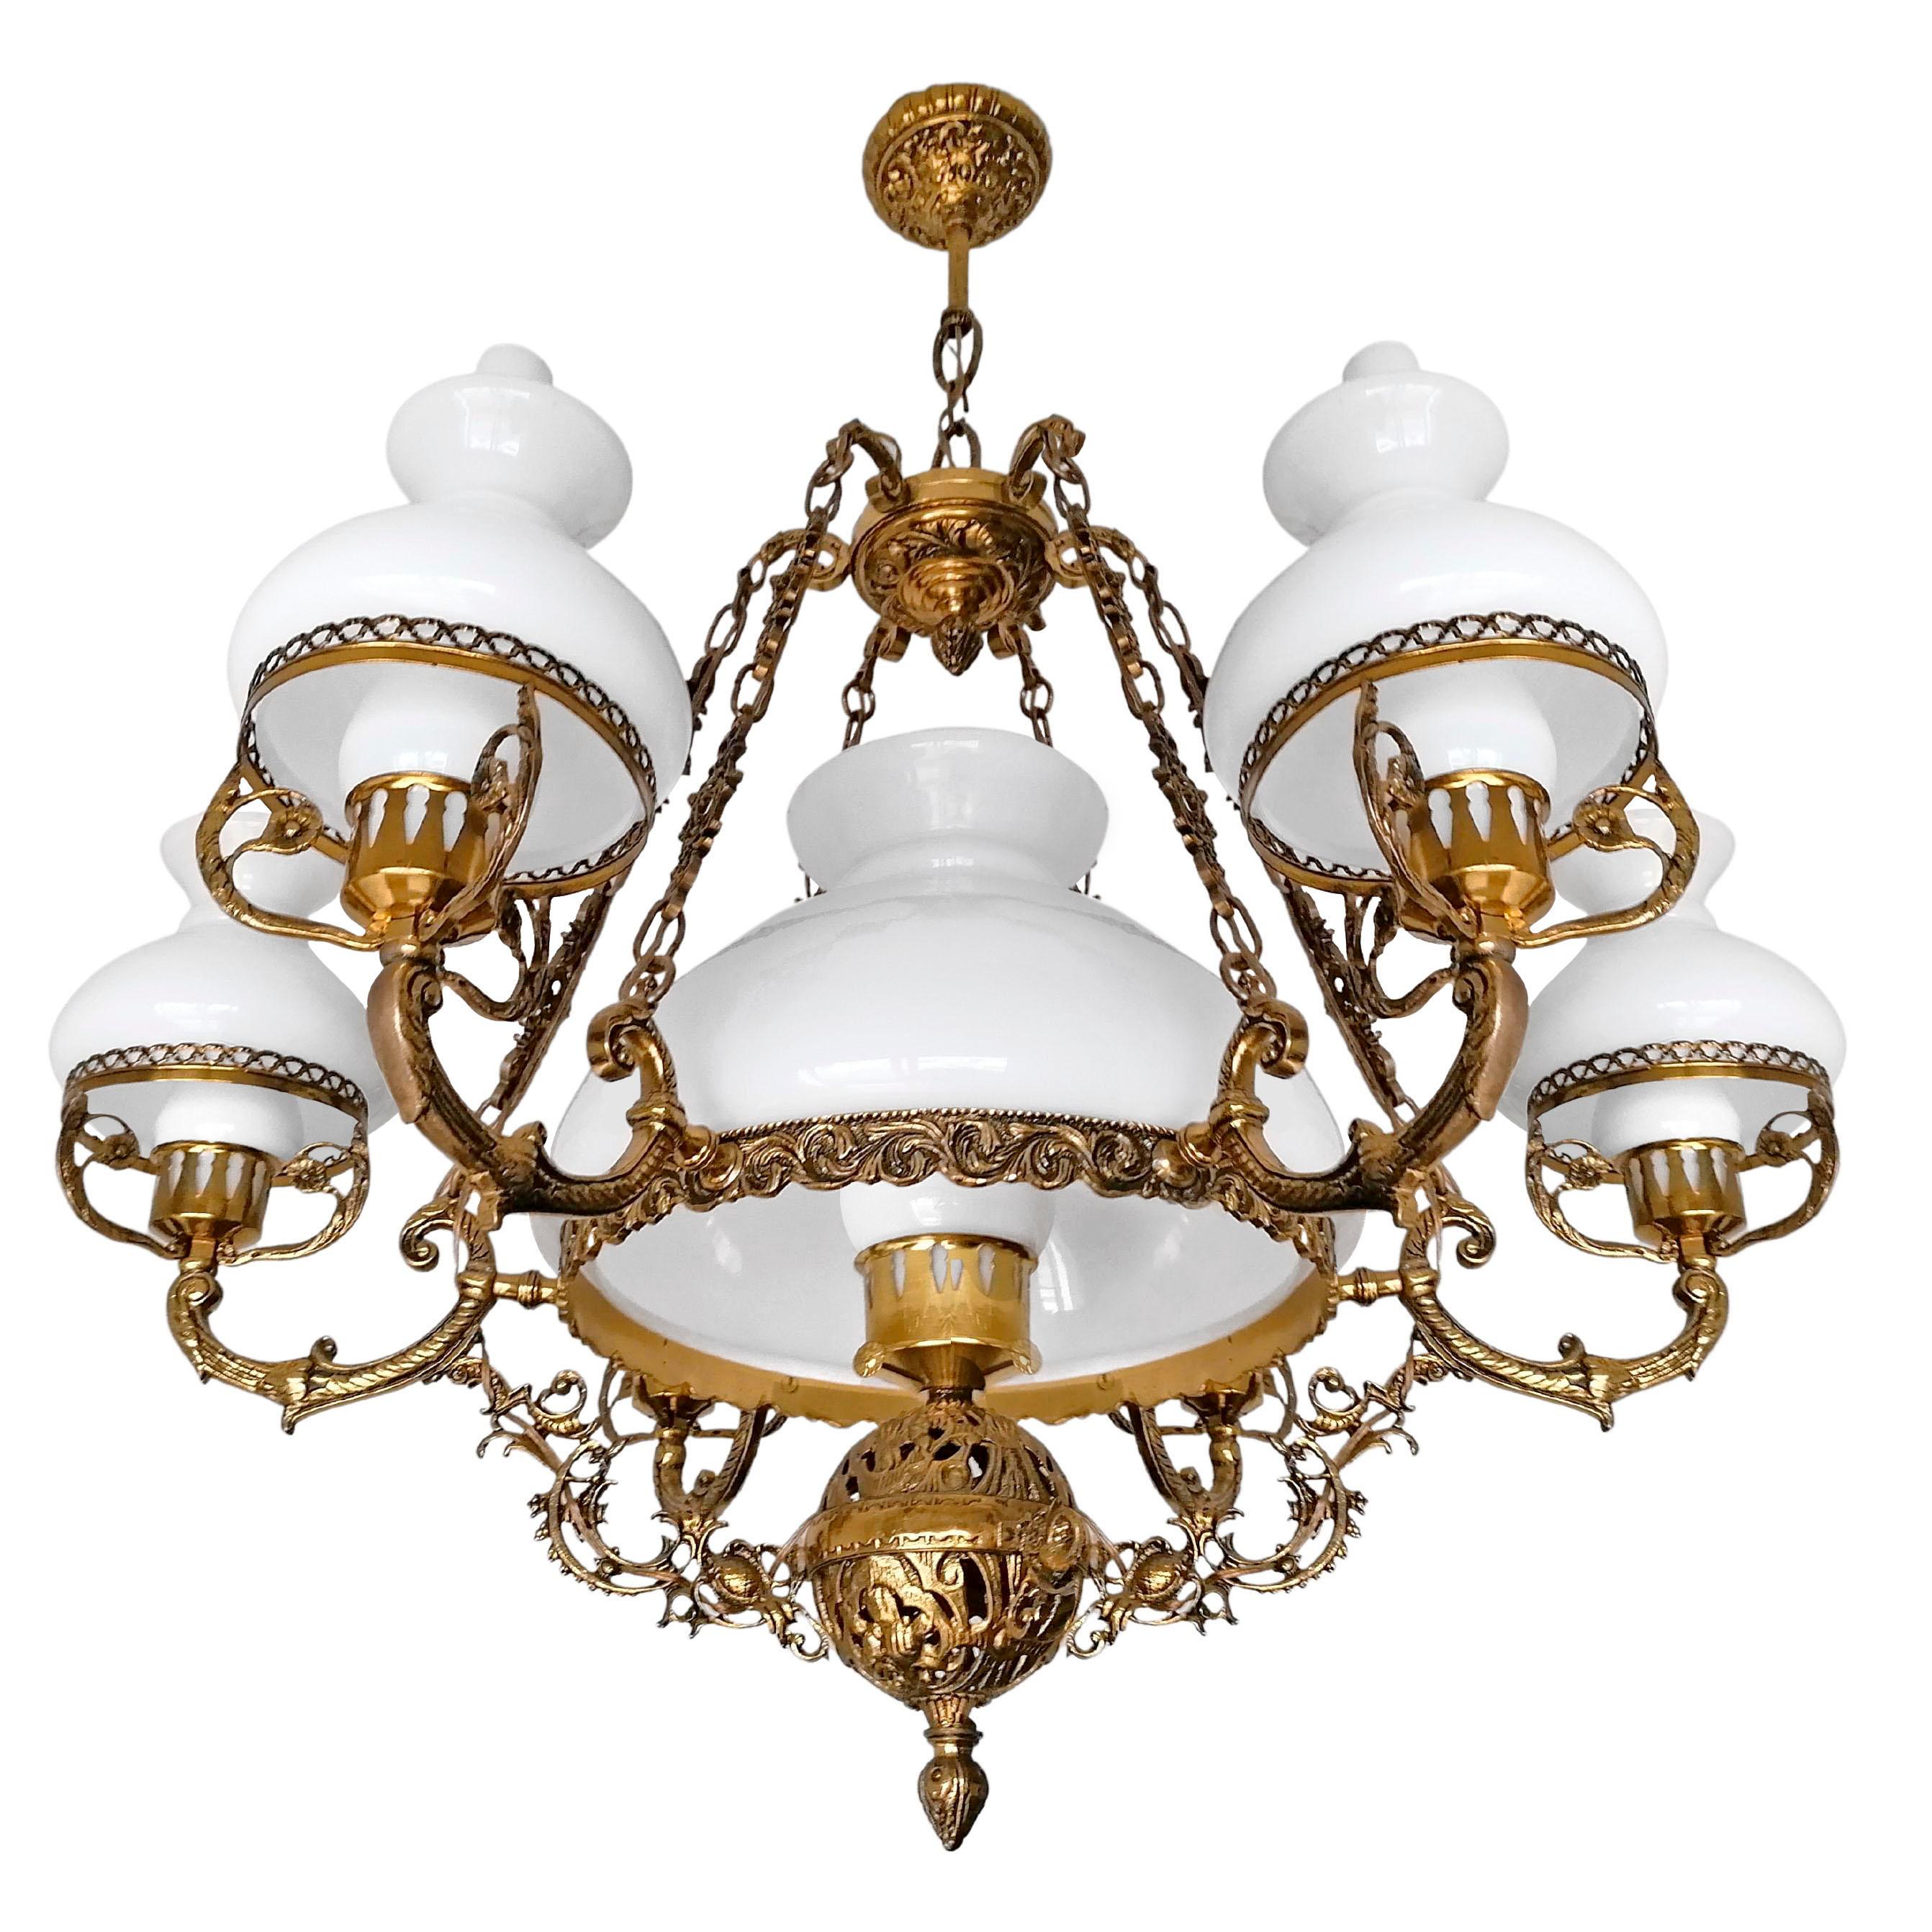 Gorgeous monumental antique circa 1940 French Victorian 7-light bulbs chandelier with Opaline green cased glass and chiselled gilt bronze/ brass.
Measures:
Diameter 36 in / 90 cm
Height 40 in / 100 cm
Diameter glass shades 14 in (36 cm)/ 9 in